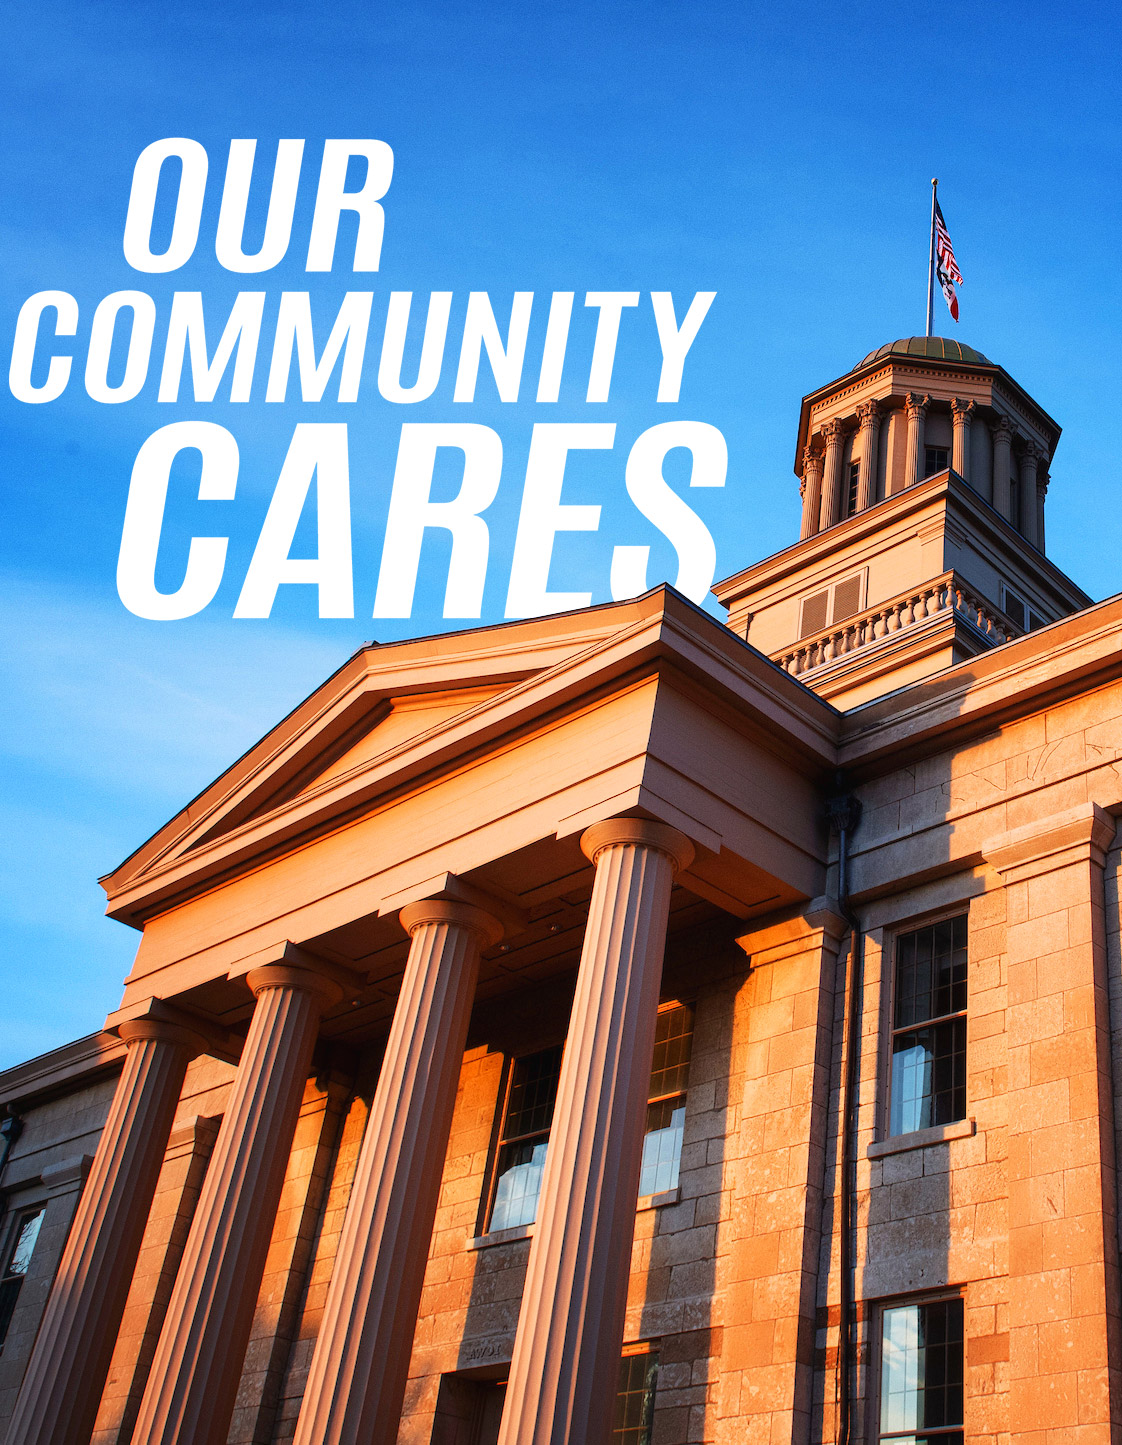 Contains the text "Our Community Cares" in front of the Old Capitol at sunset